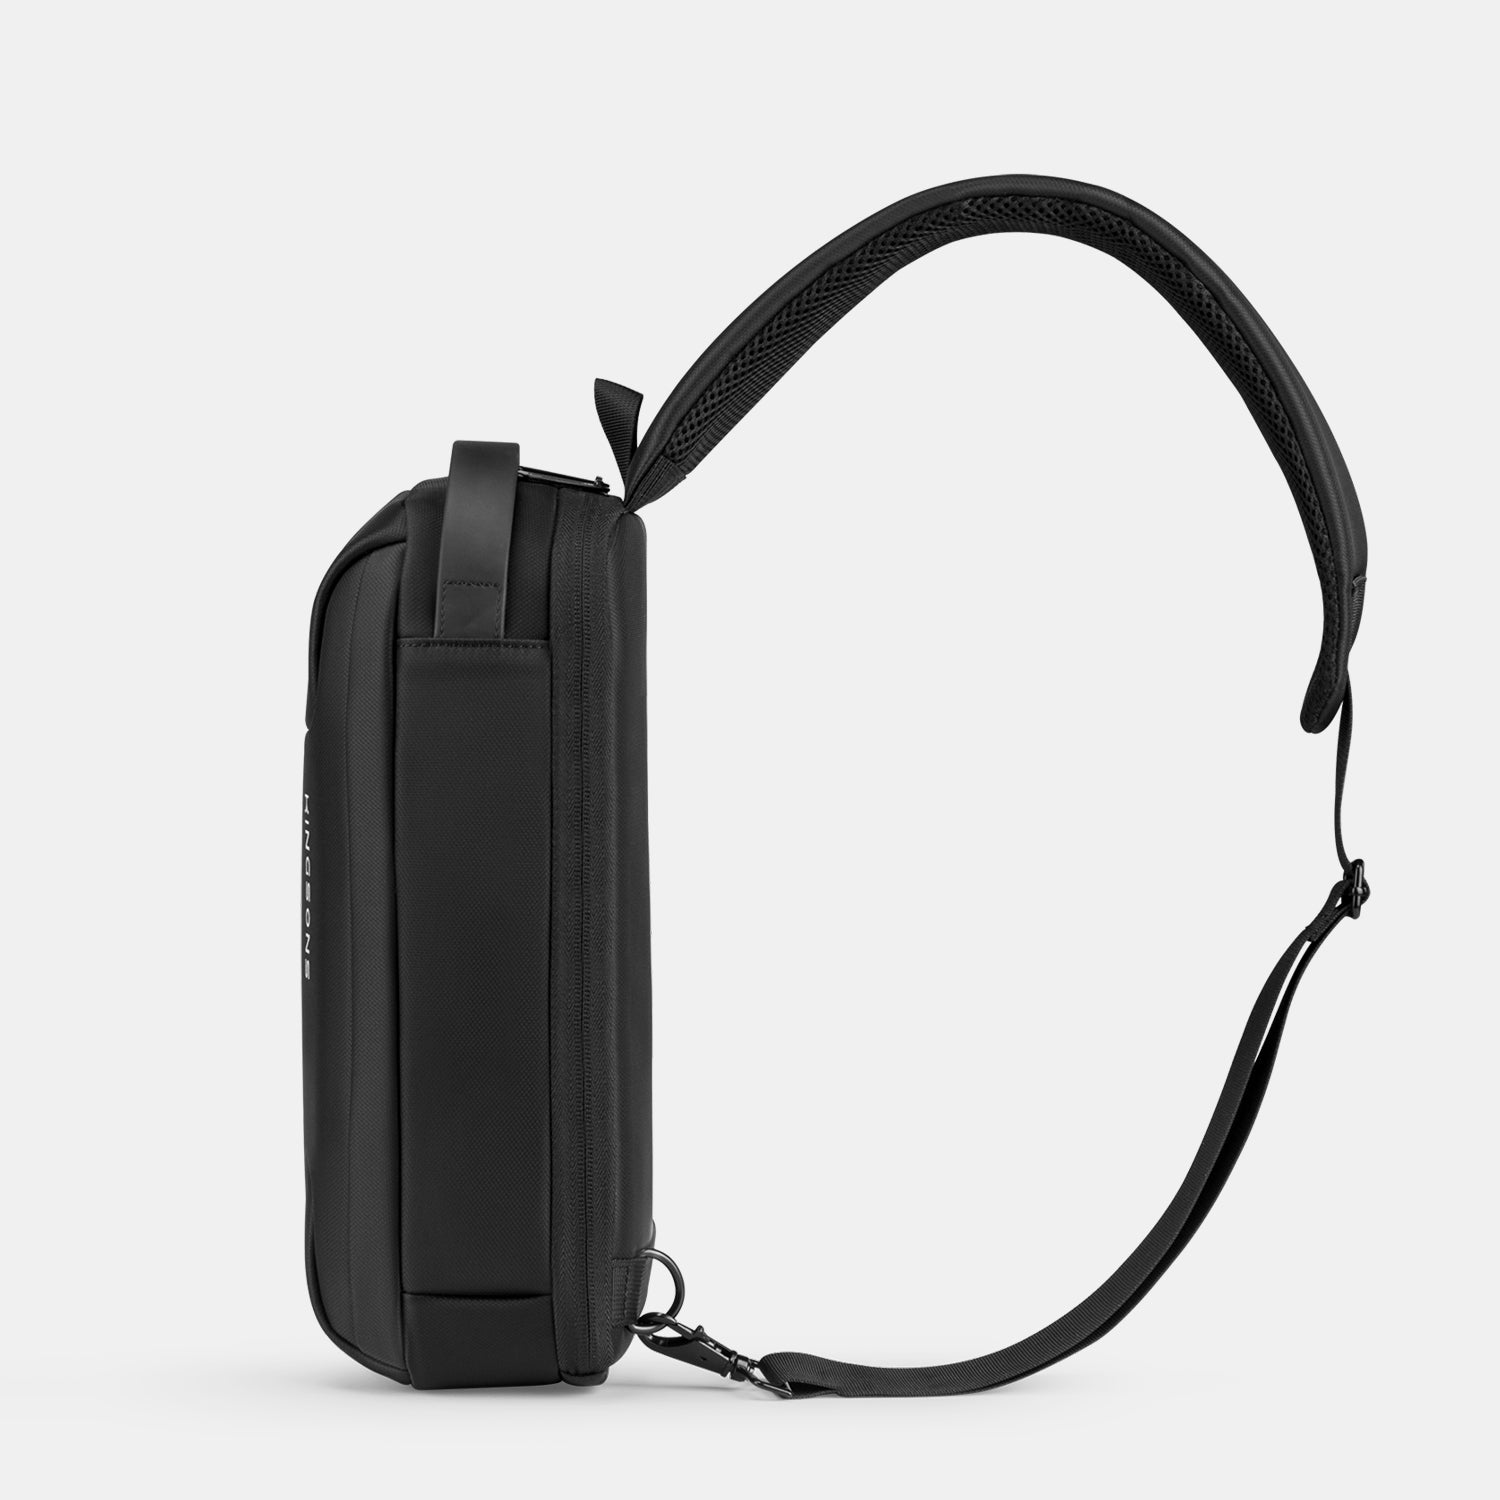 Kingsons Anti-theft Sling Bag Outdoor Travel Crossbody Chest Bag With USB Port